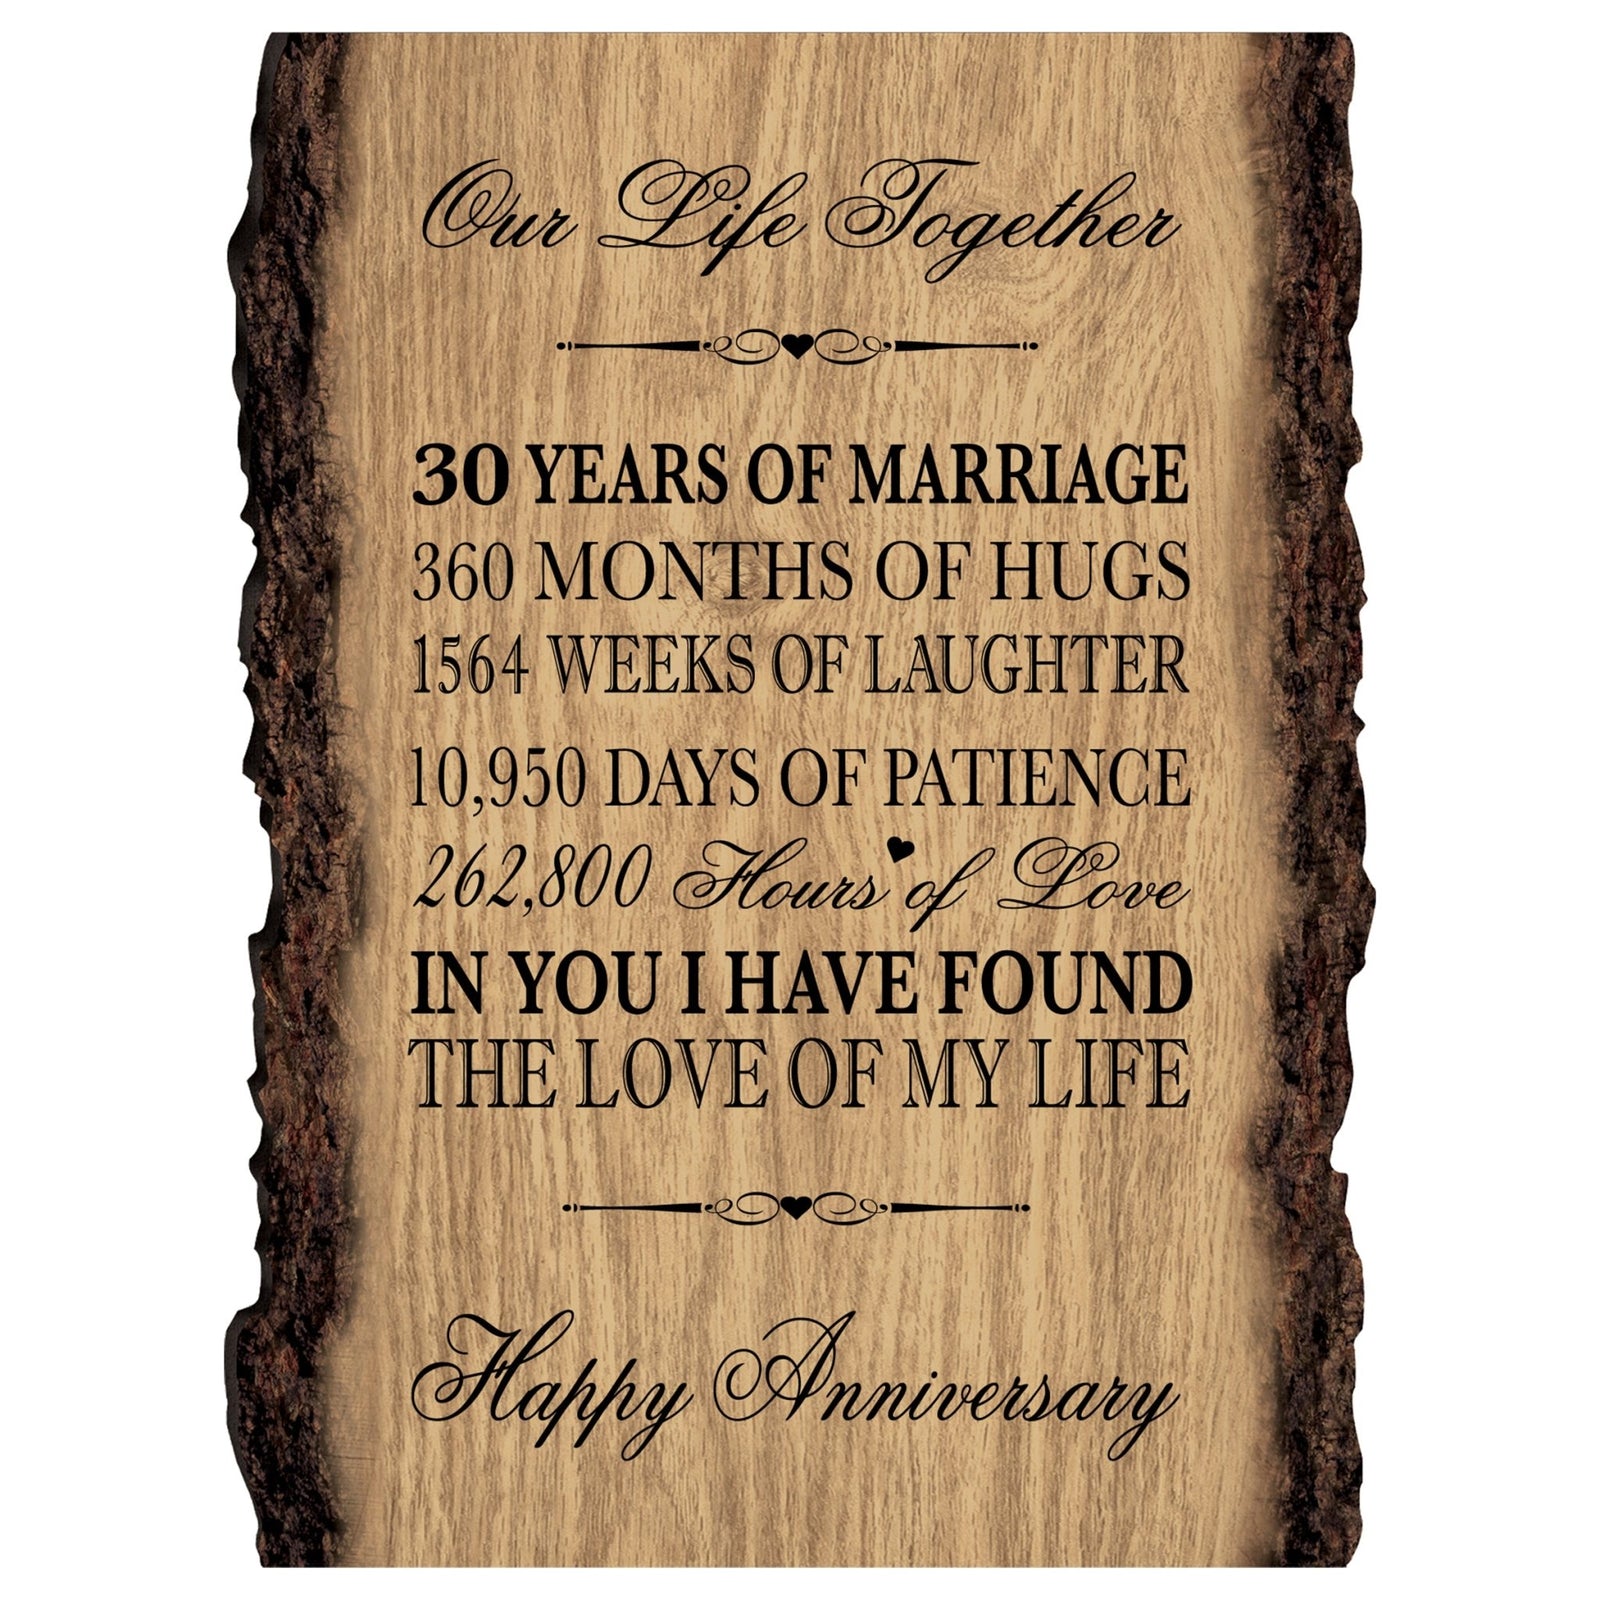 Rustic Wedding Anniversary 9x12 Barky Wall Plaque Gift For Parents, Grandparents New Couple - 30 Years Of Marriage - LifeSong Milestones